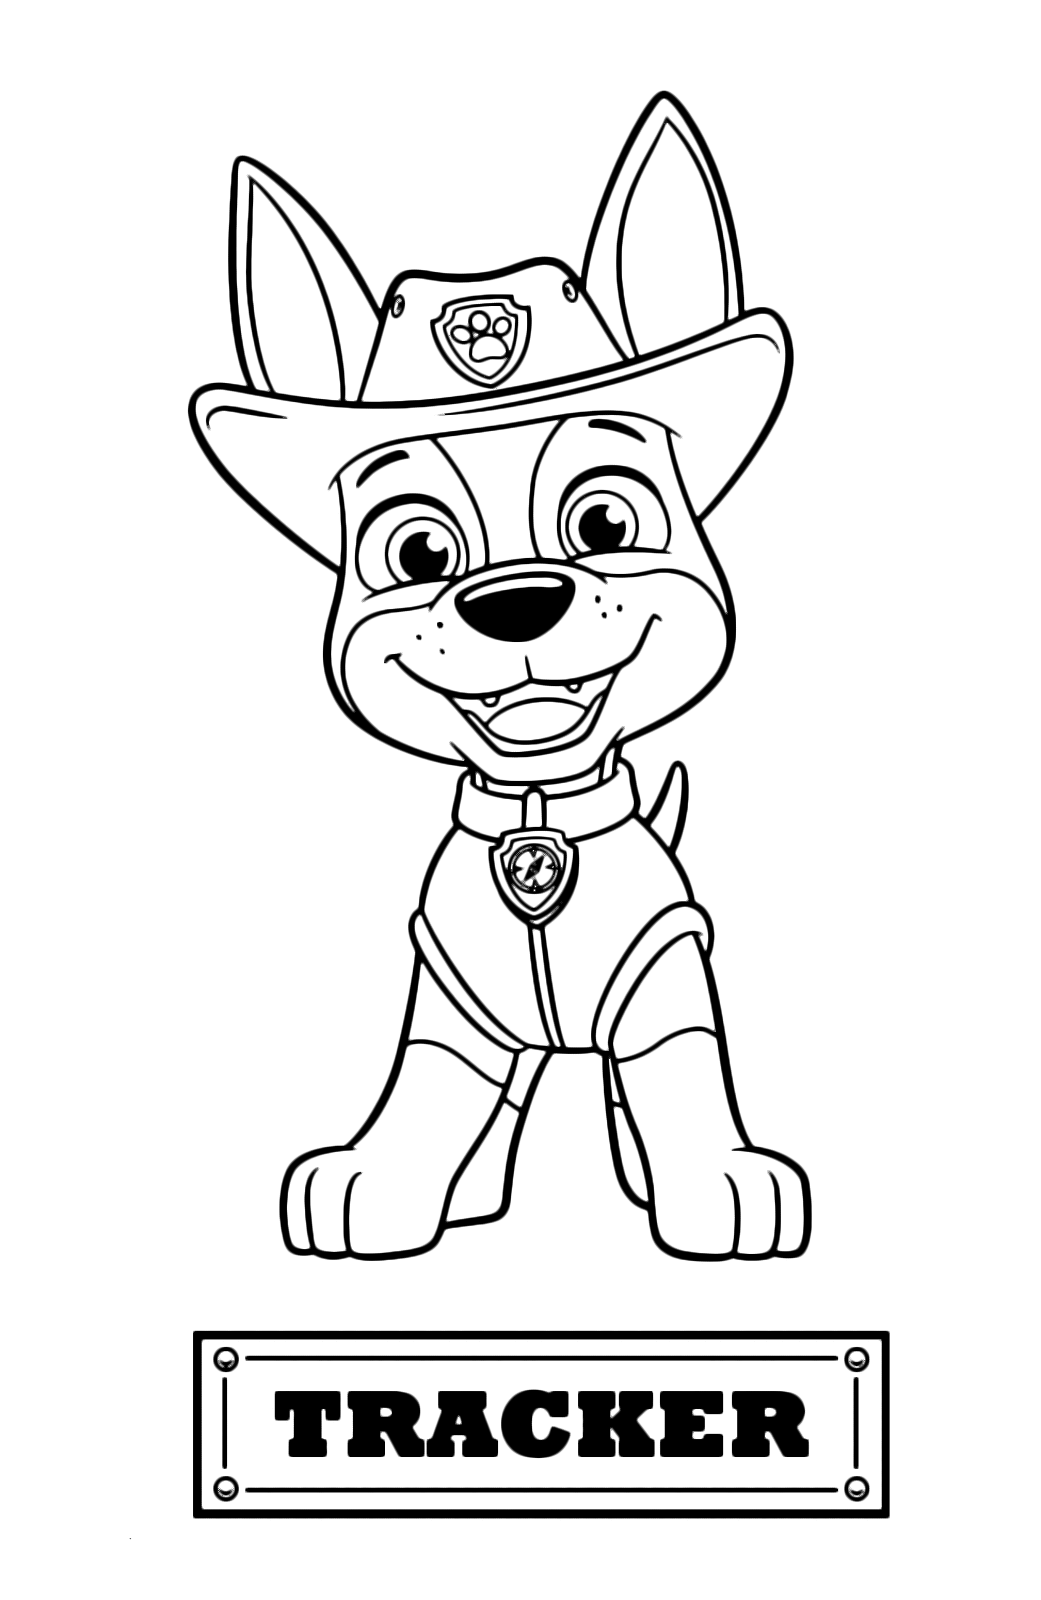 Paw Patrol Coloring Pages FREE Printable 74